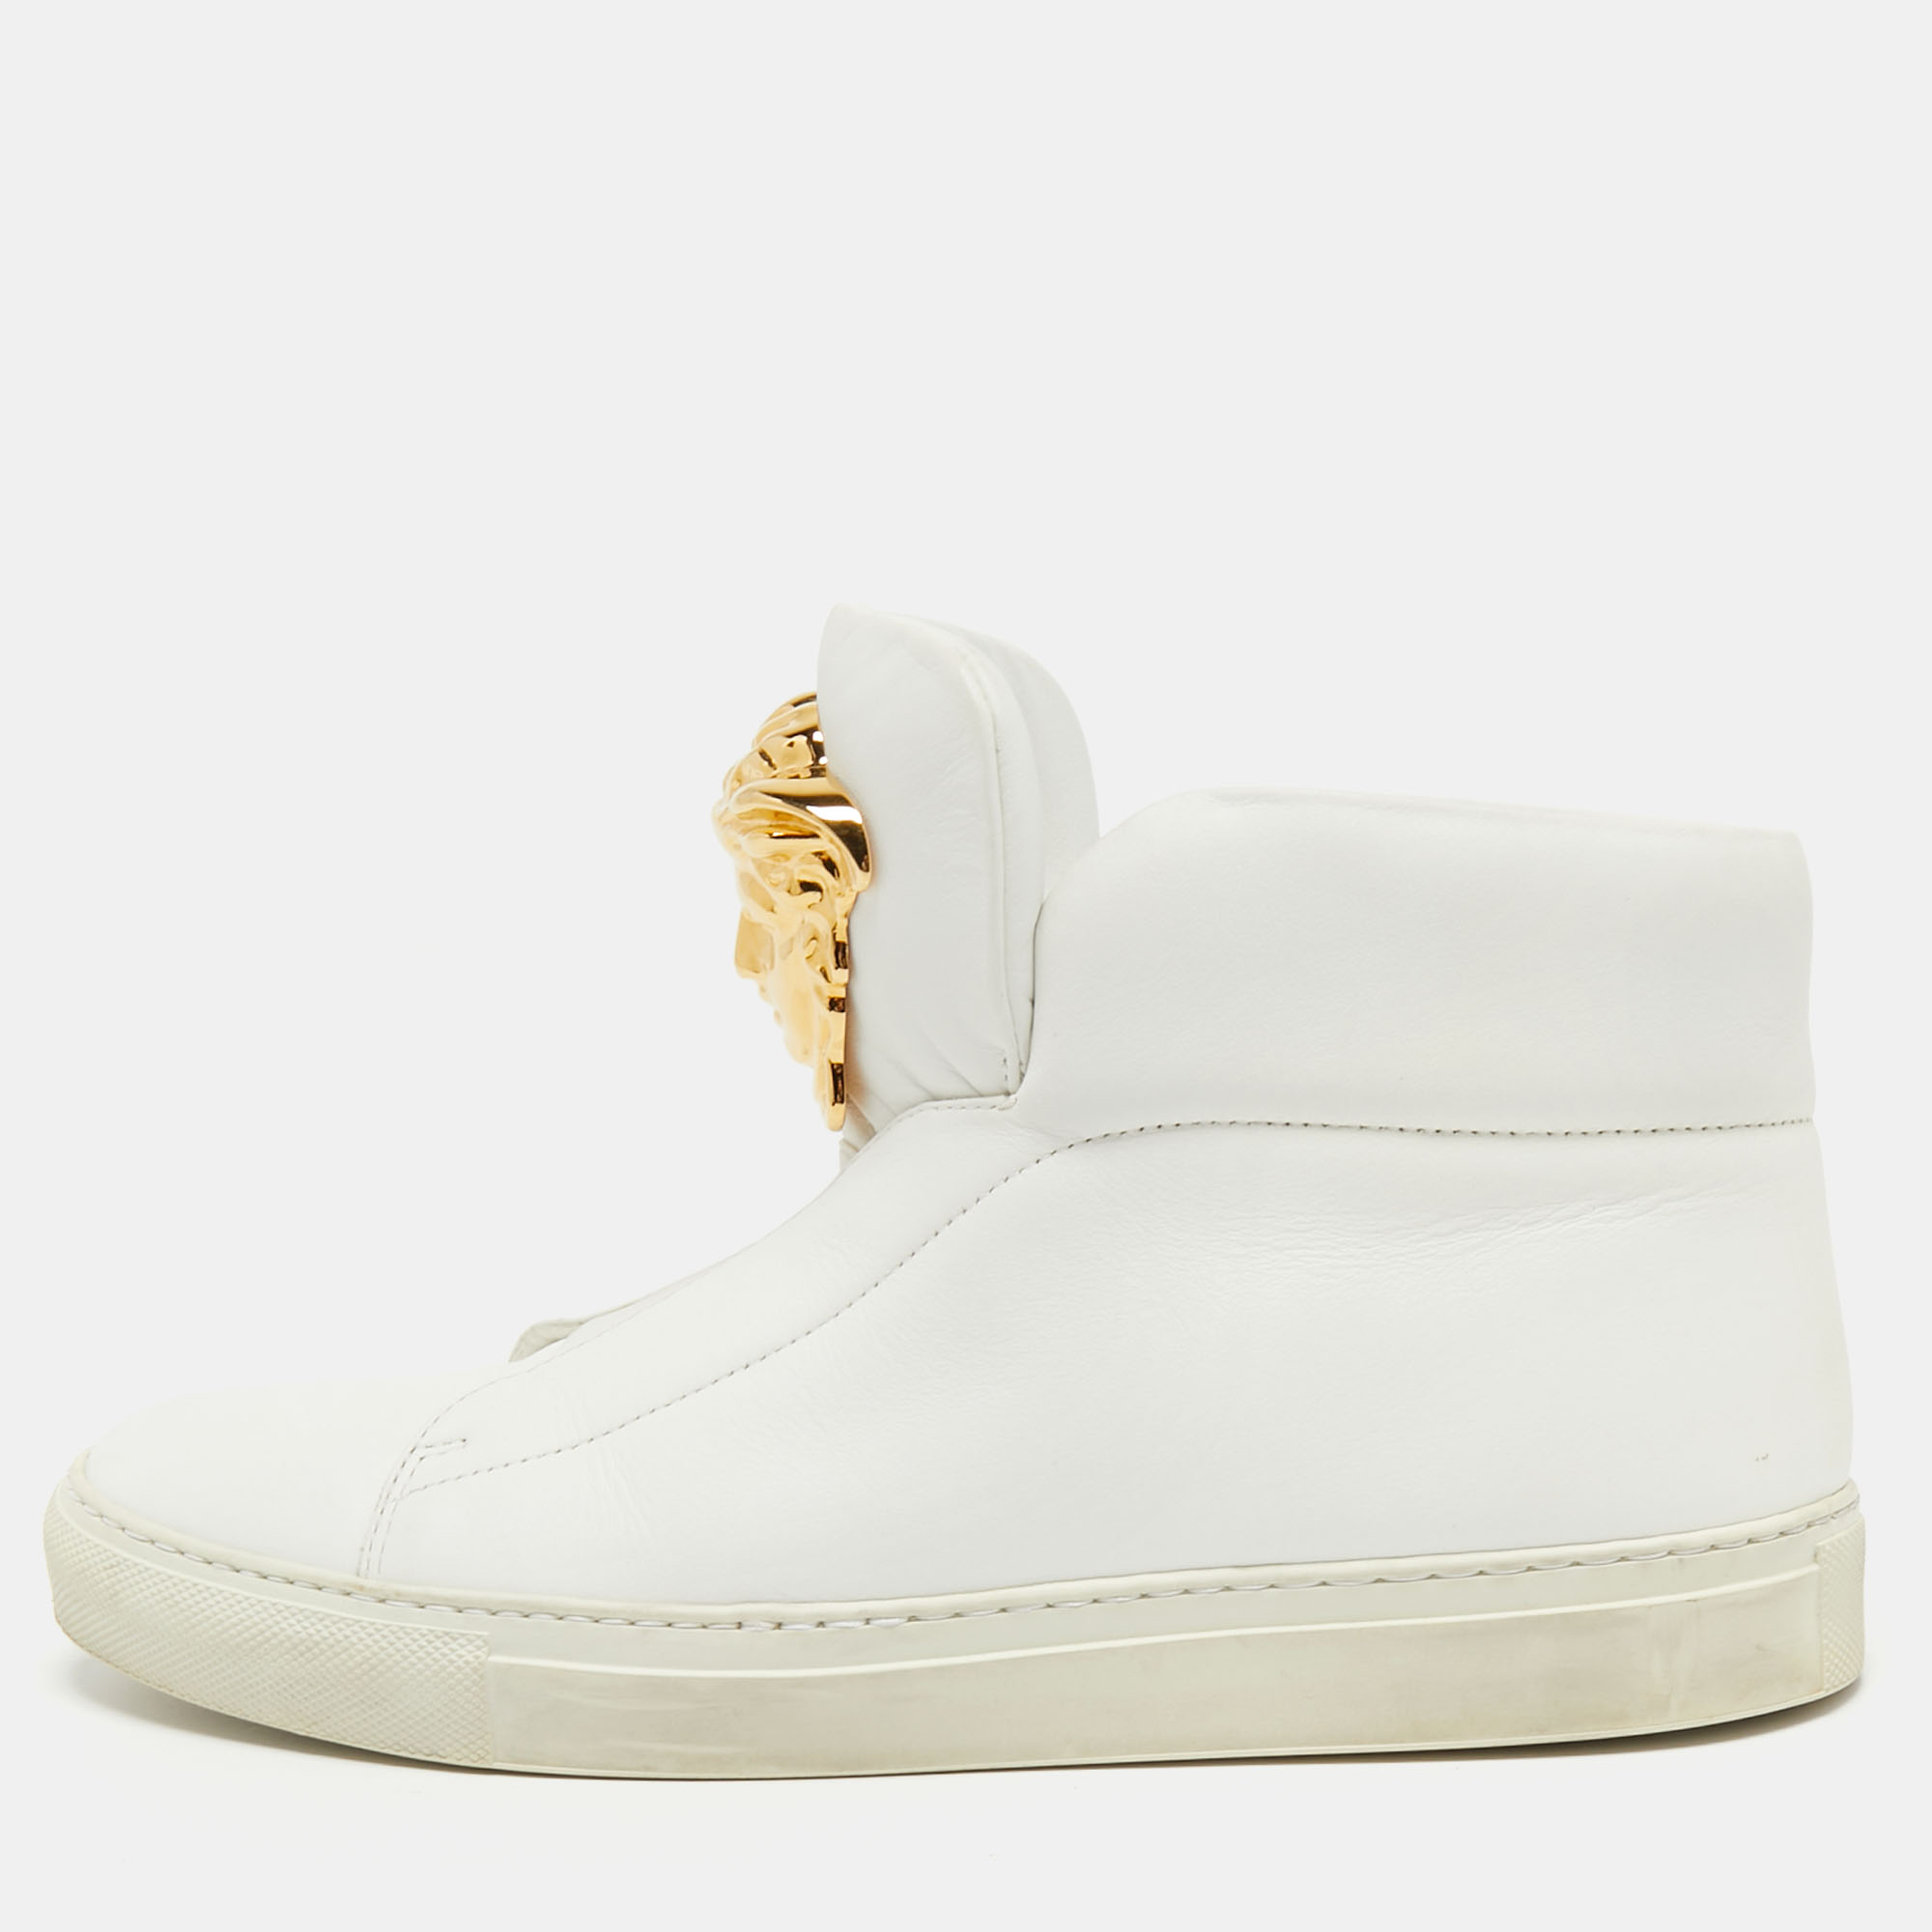 Pre-owned Versace White Leather Medusa High Top Sneakers Size 39